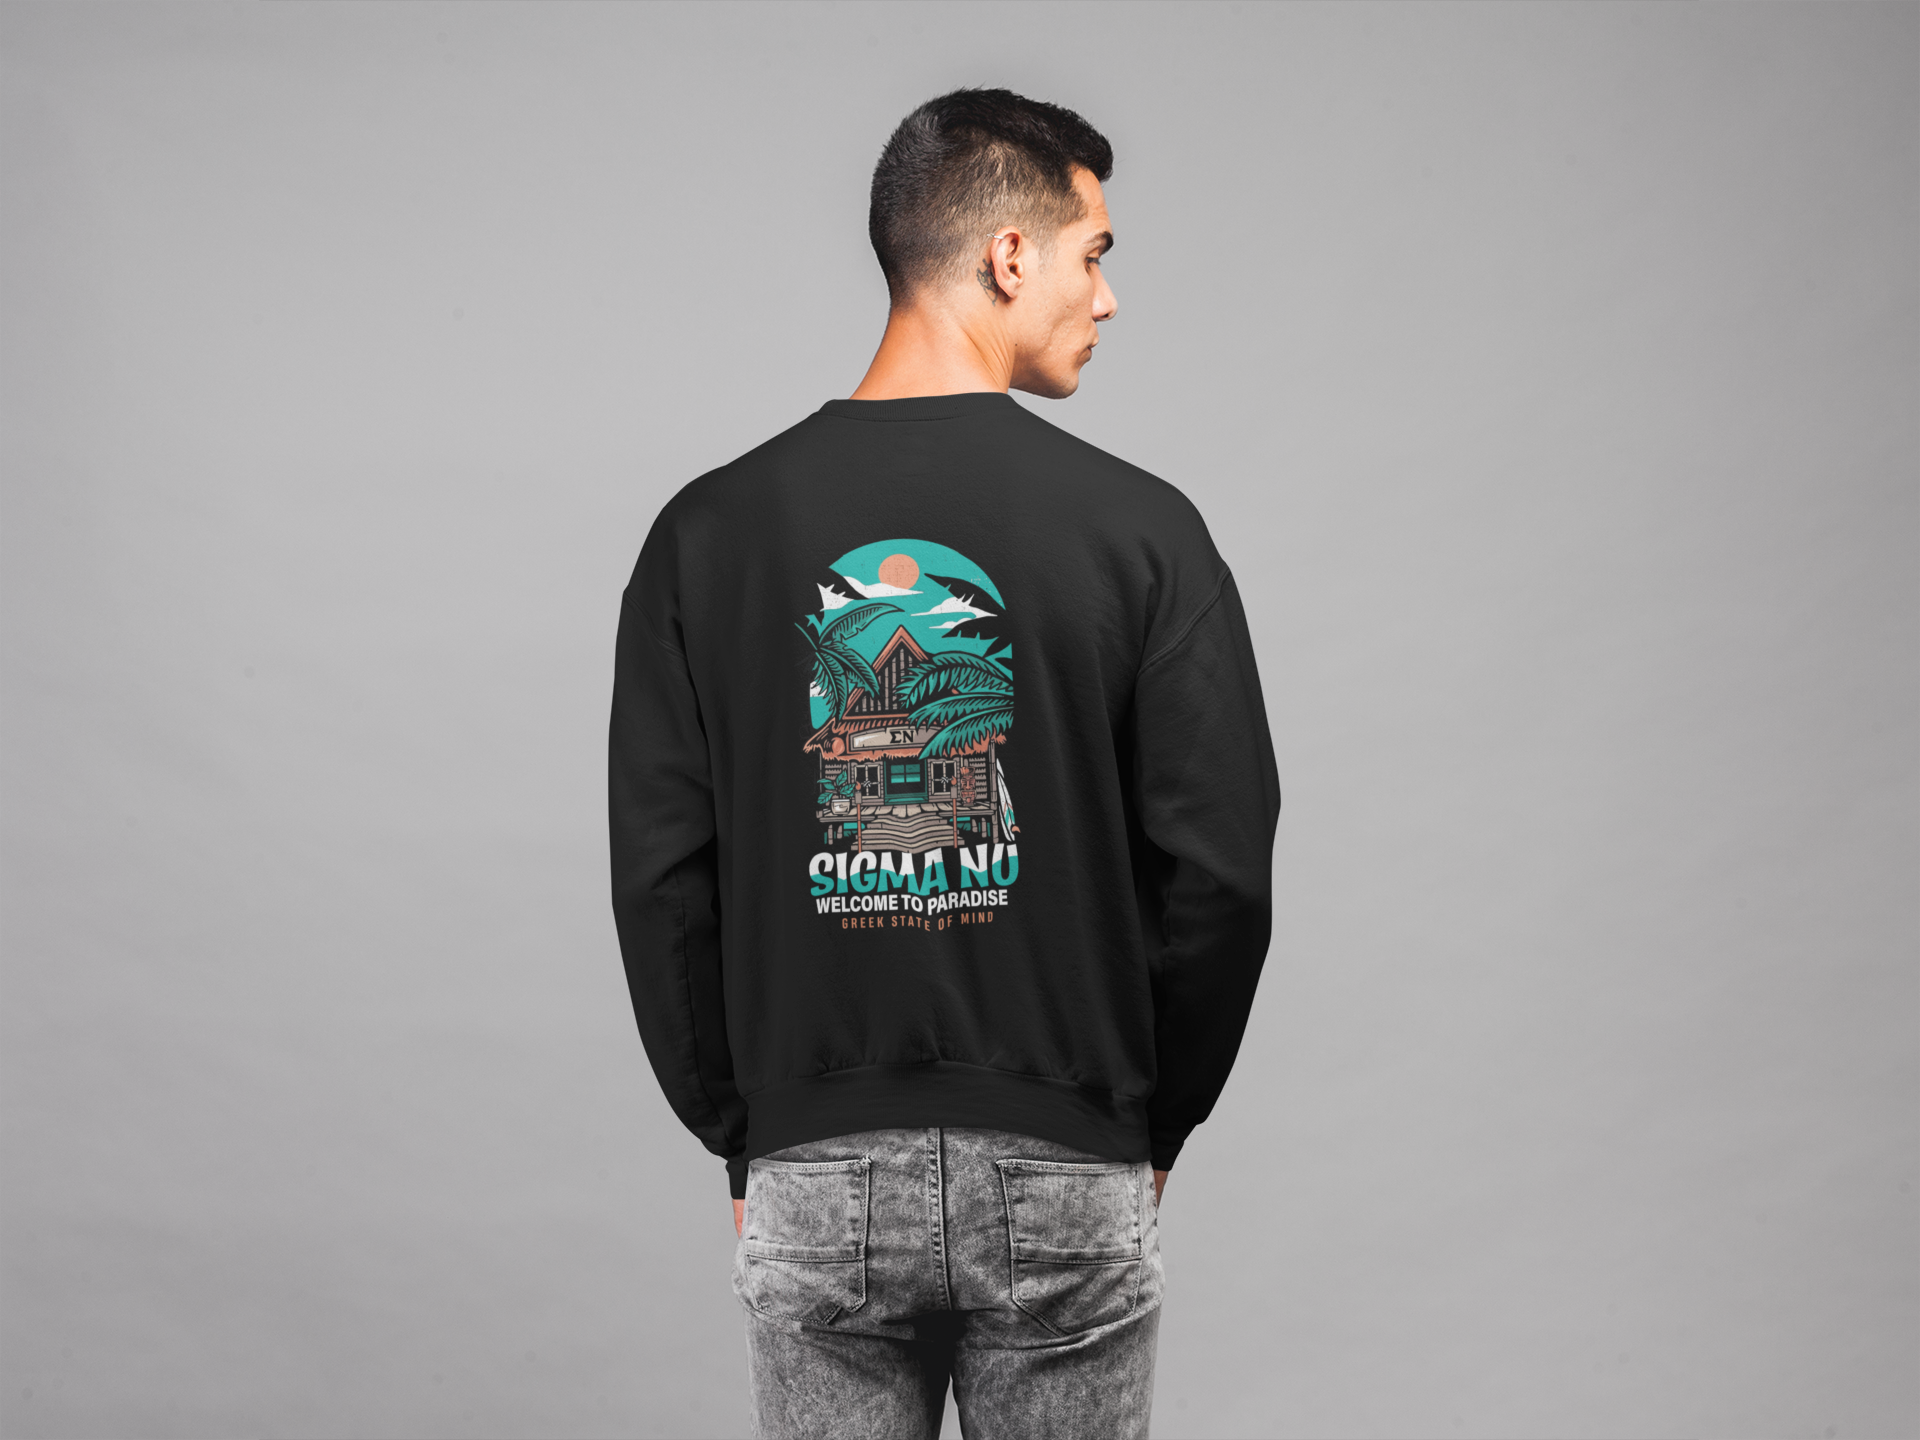 Sigma Nu Graphic Crewneck Sweatshirt | Welcome to Paradise | Sigma Nu Clothing, Apparel and Merchandise model